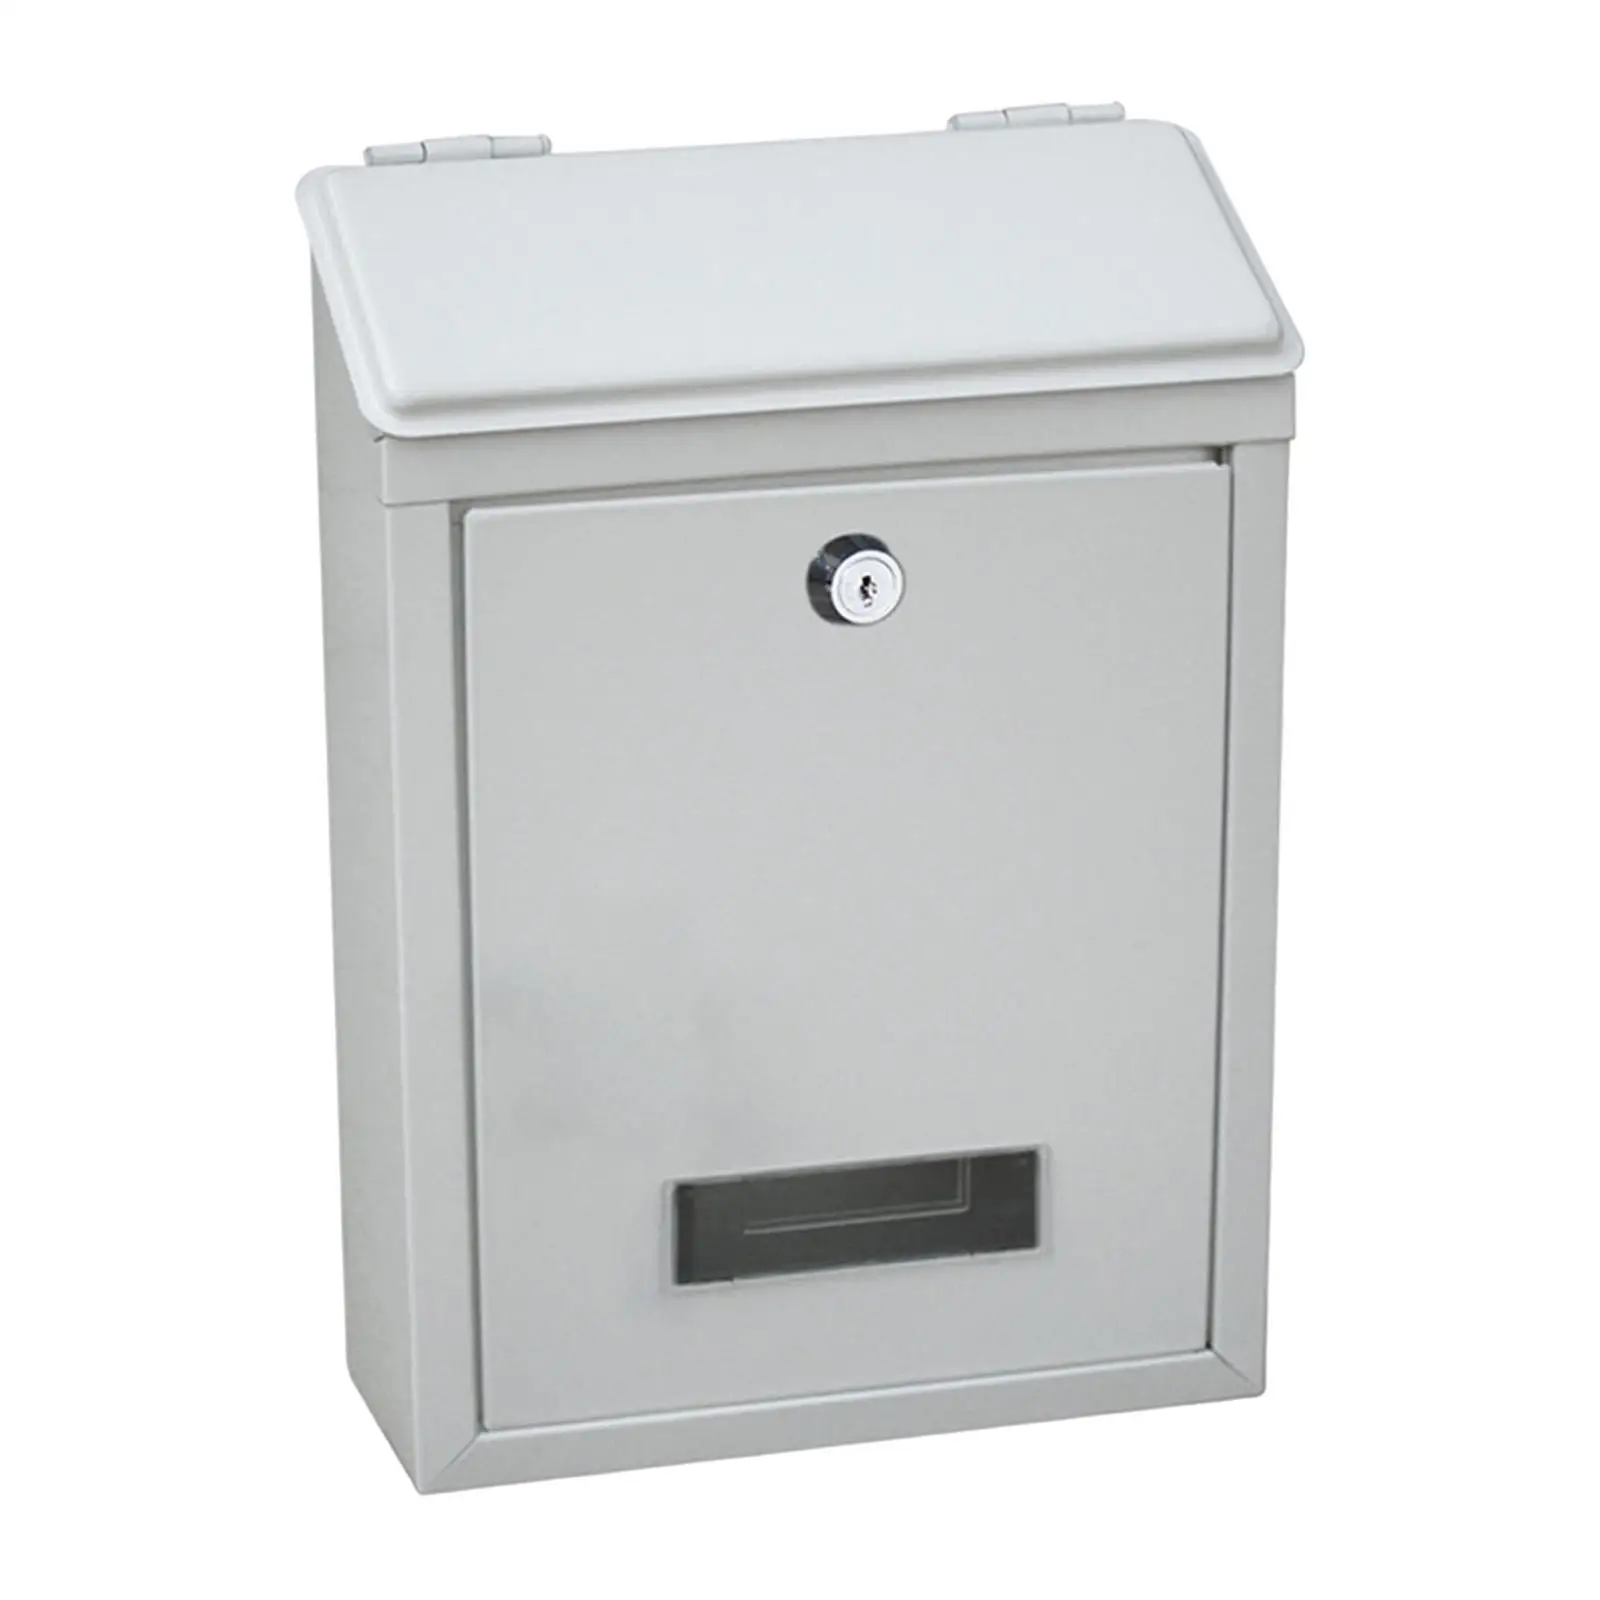 Large Wall Mount Mailbox Lockable Mail Insertion Windproof Metal Drop Box Letter Box for Home Decorative office Outdoor